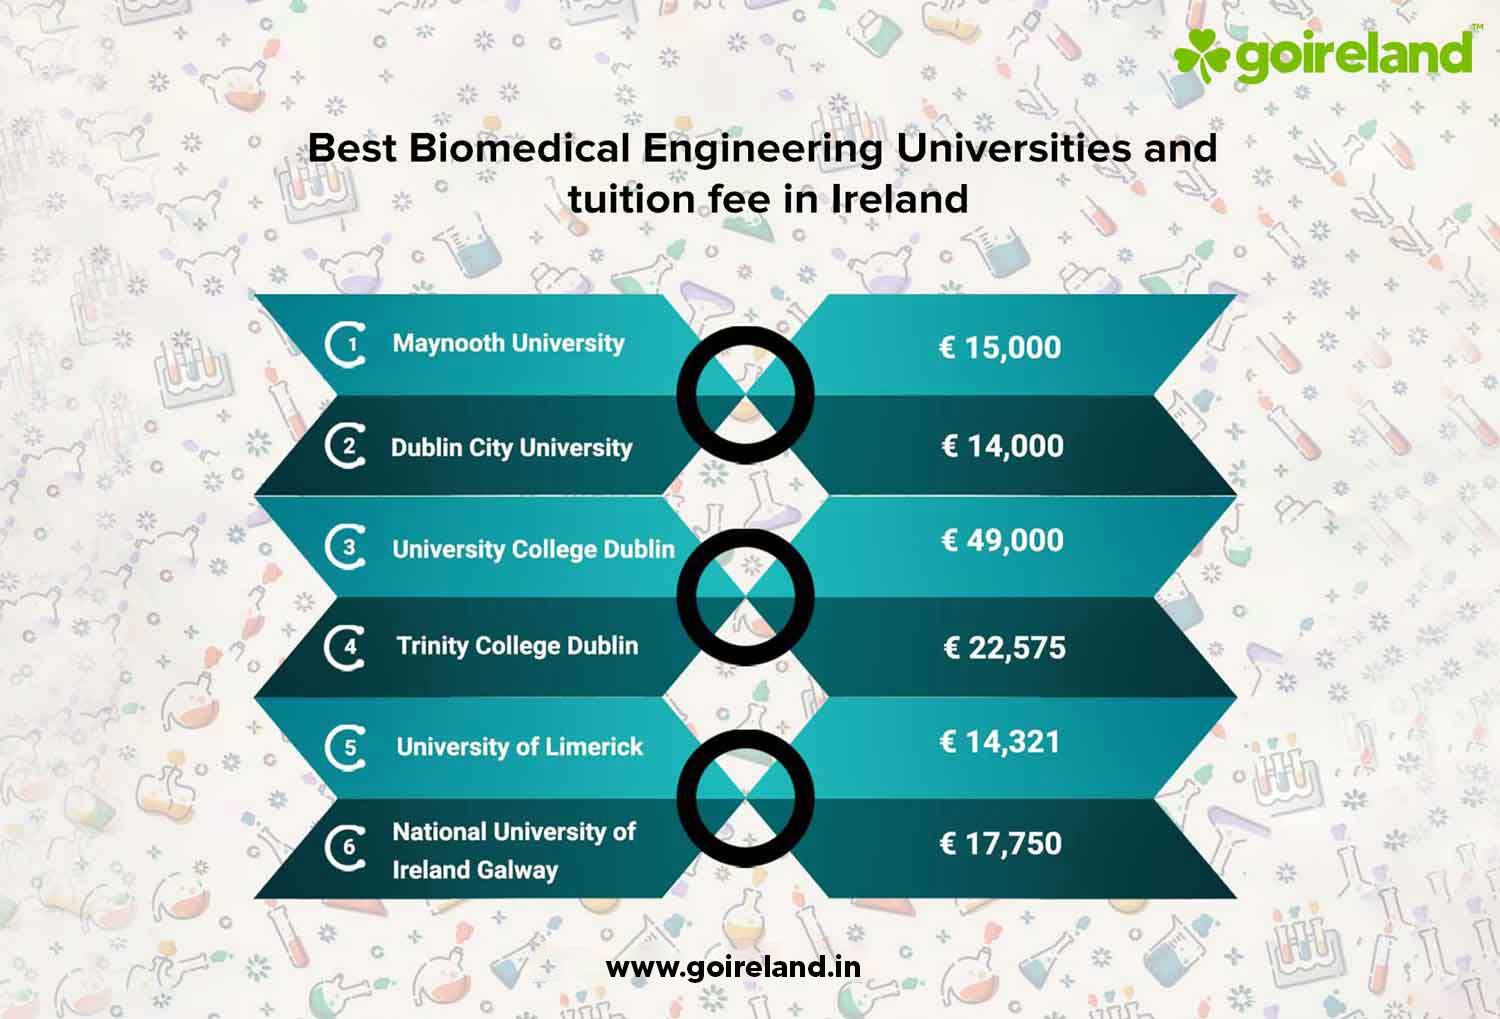 Best Biomedical Engineering University and Tuition Fee in Ireland